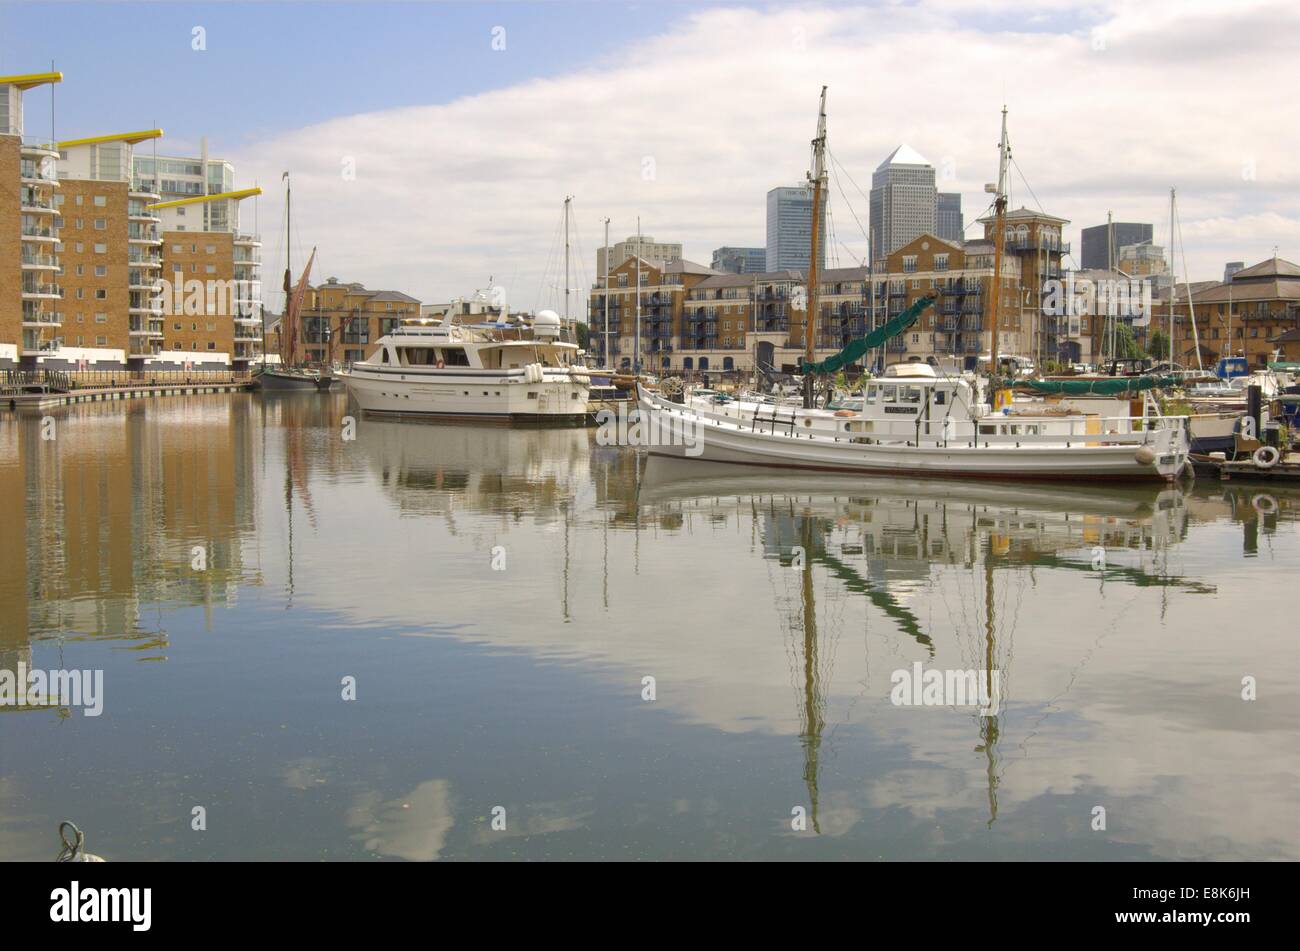 Docklands skyline and yacht in Limehouse marina in London, England Stock Photo